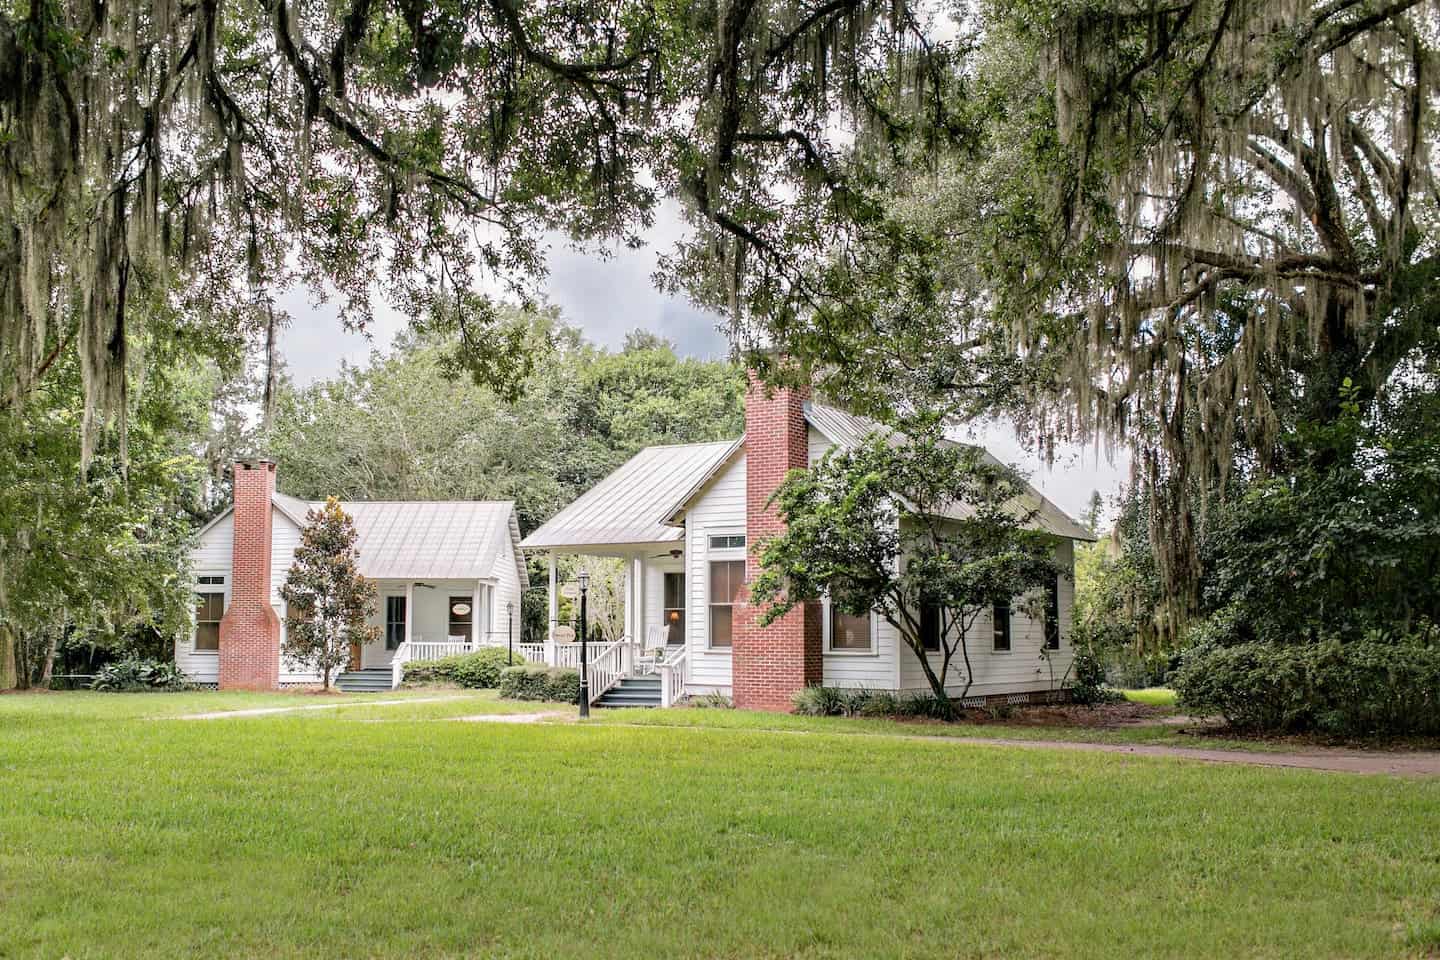 Image of Airbnb rental in Tallahassee, Florida